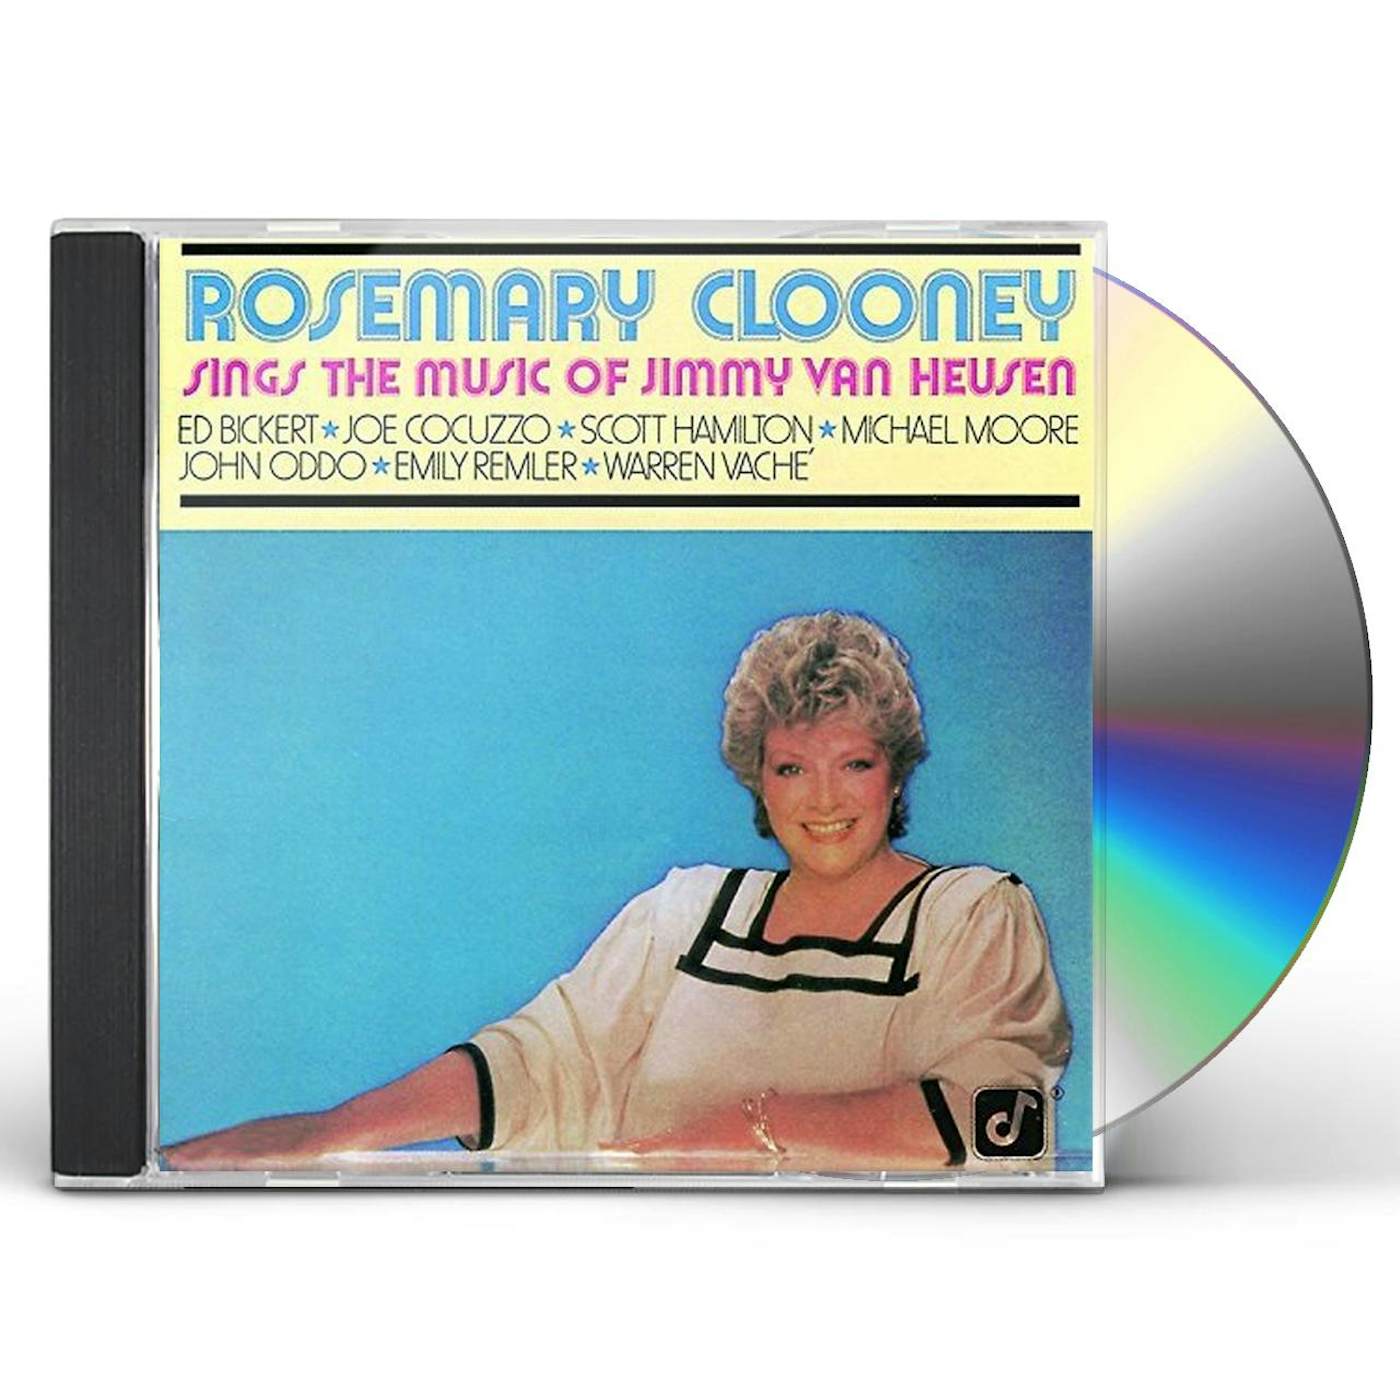 Rosemary Clooney SINGS THE MUSIC OF JOHNNY CD